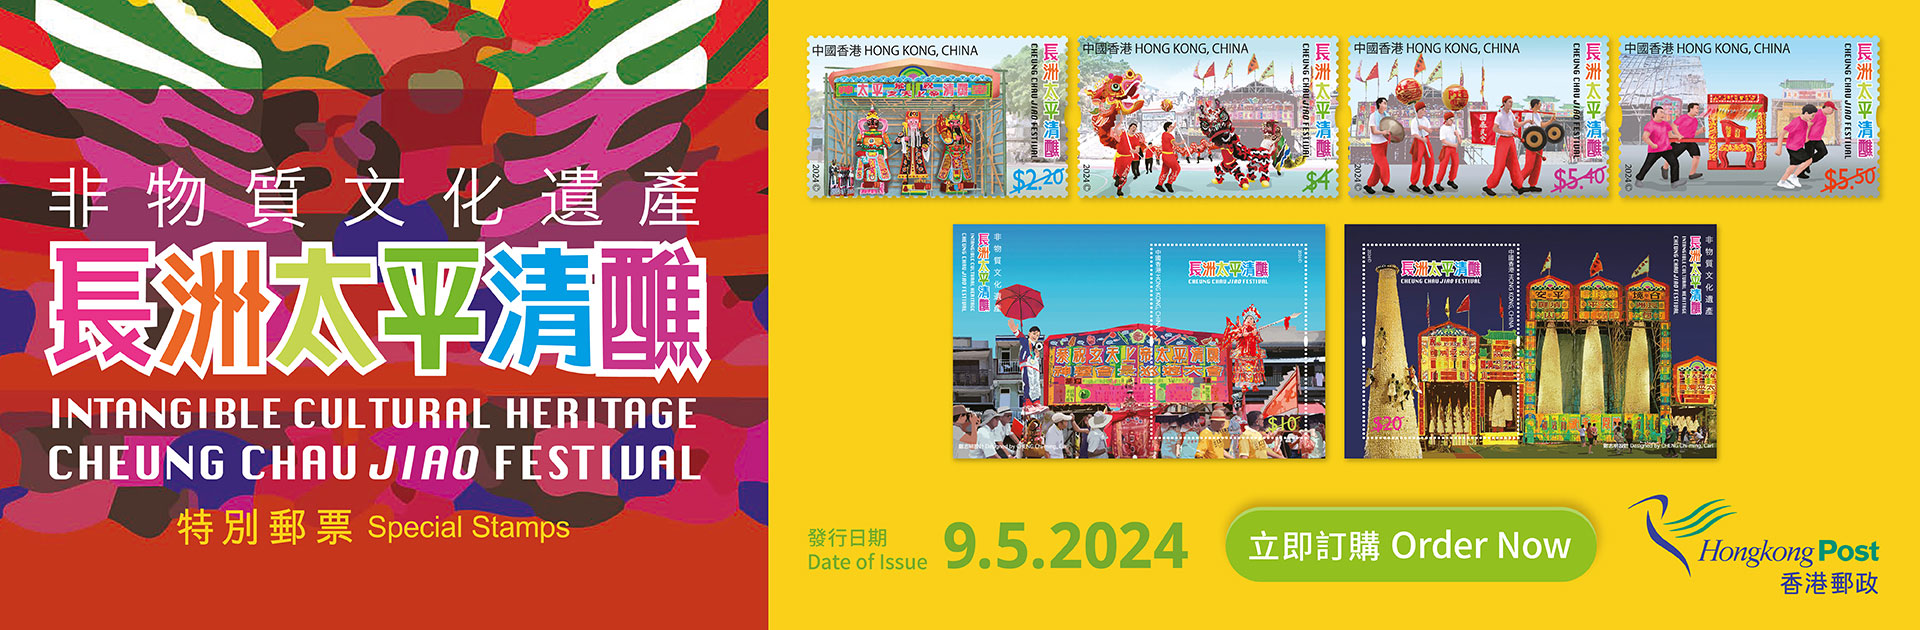 Intangible Cultural Heritage – Cheung Chau Jiao Festival